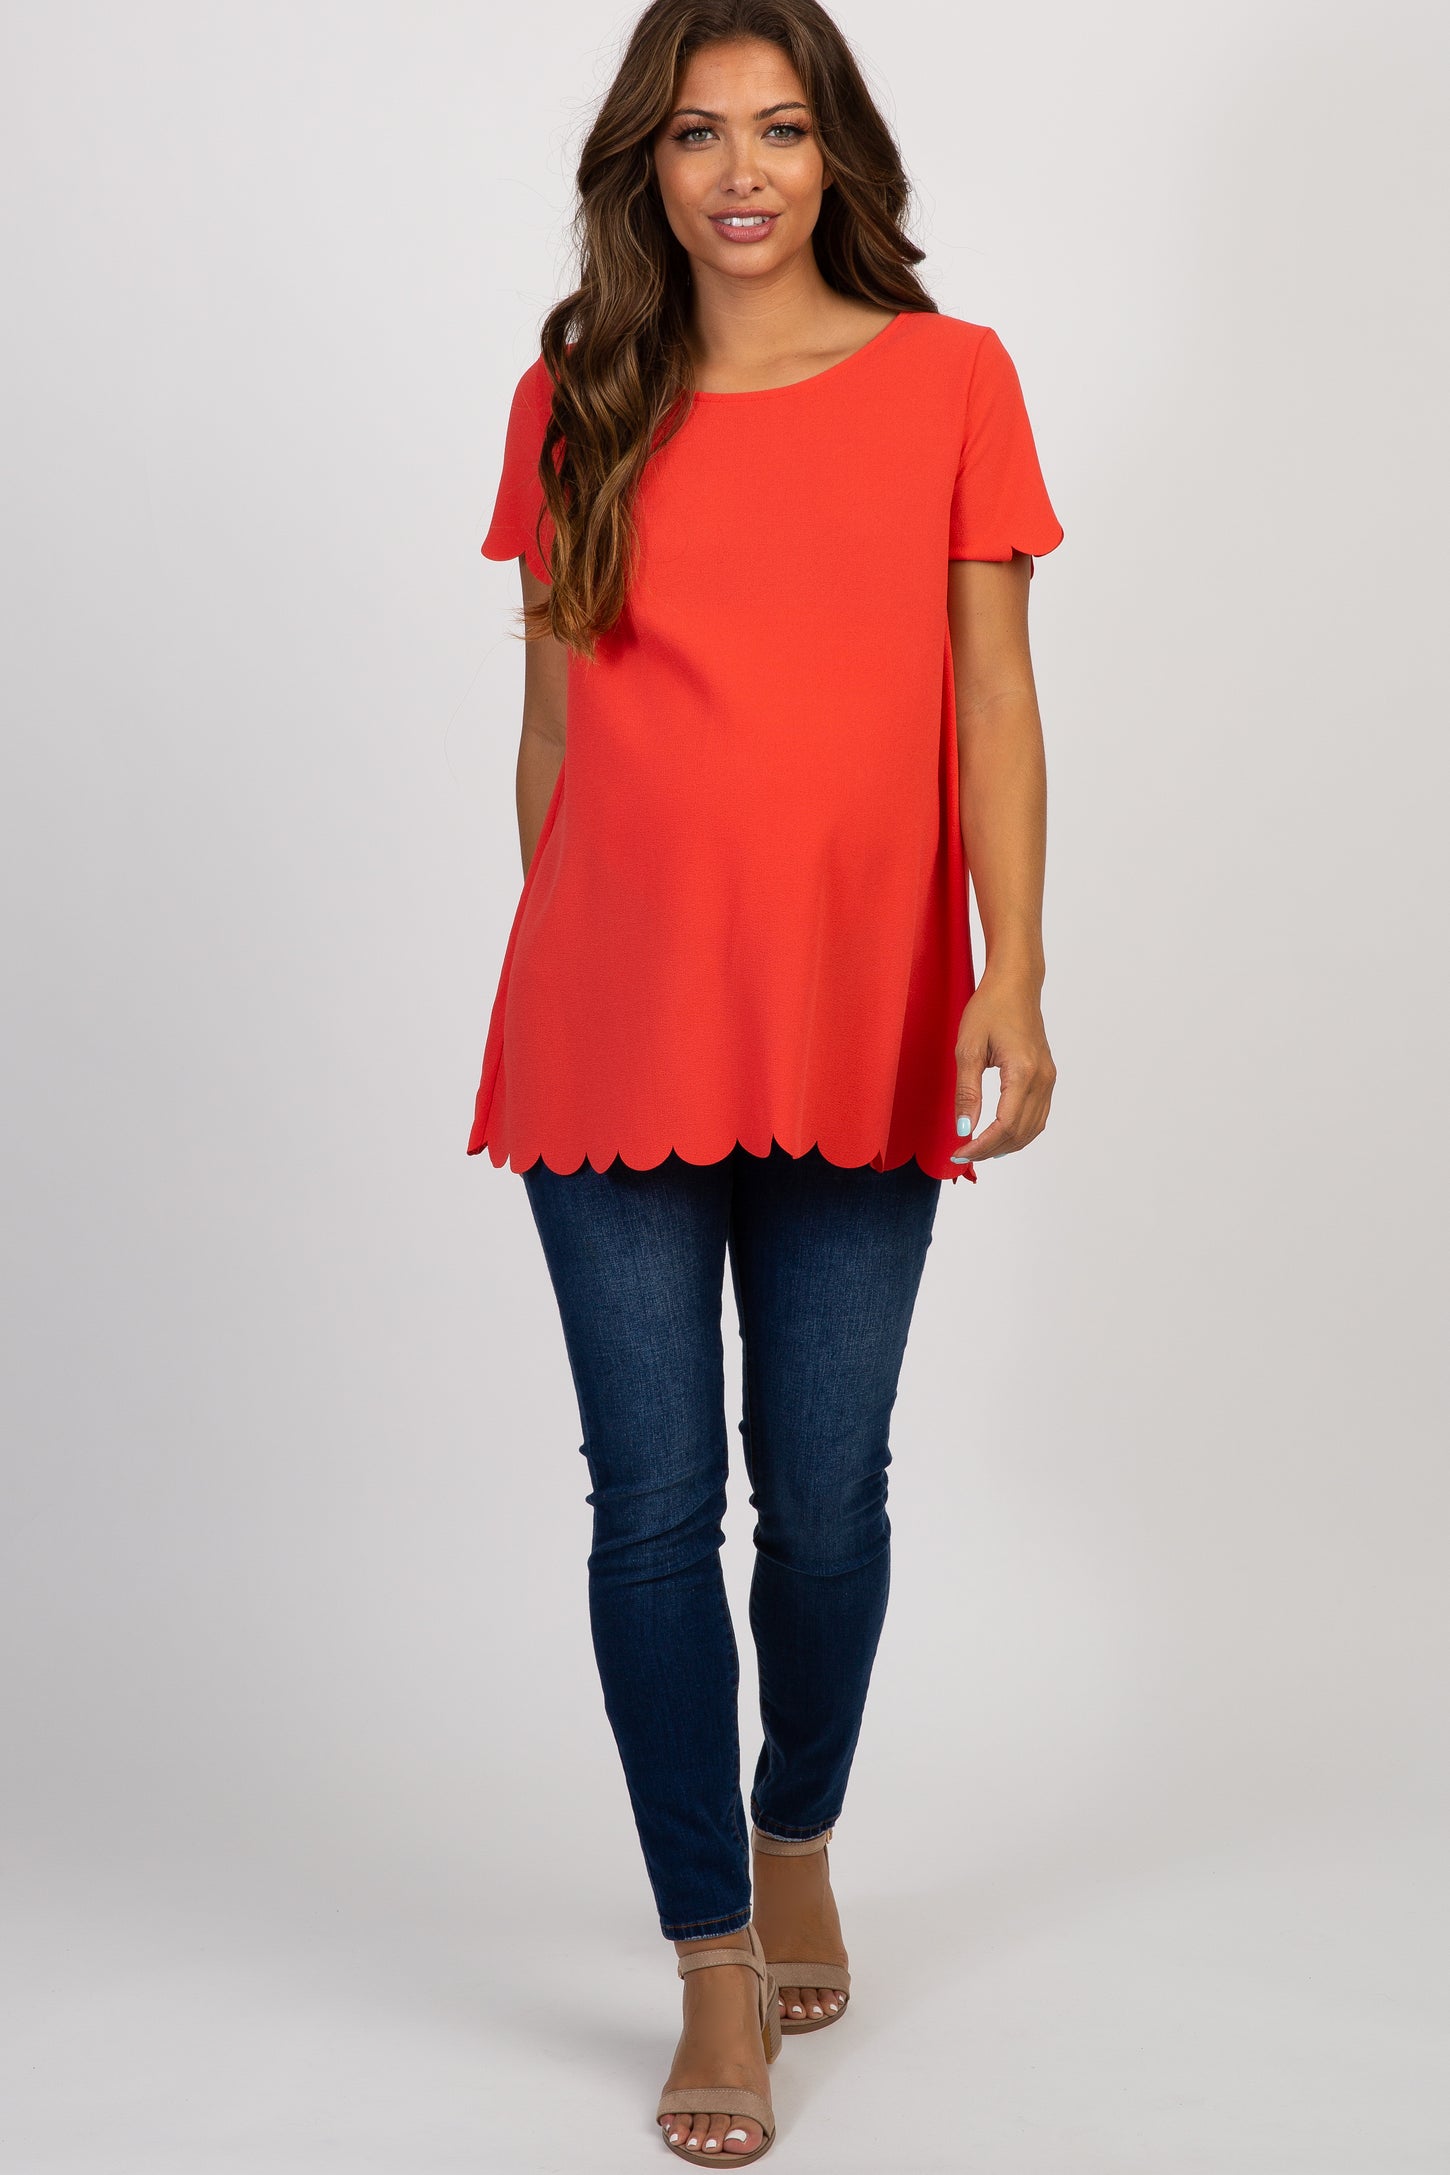 PinkBlush Coral Solid Scalloped Hem Maternity Top